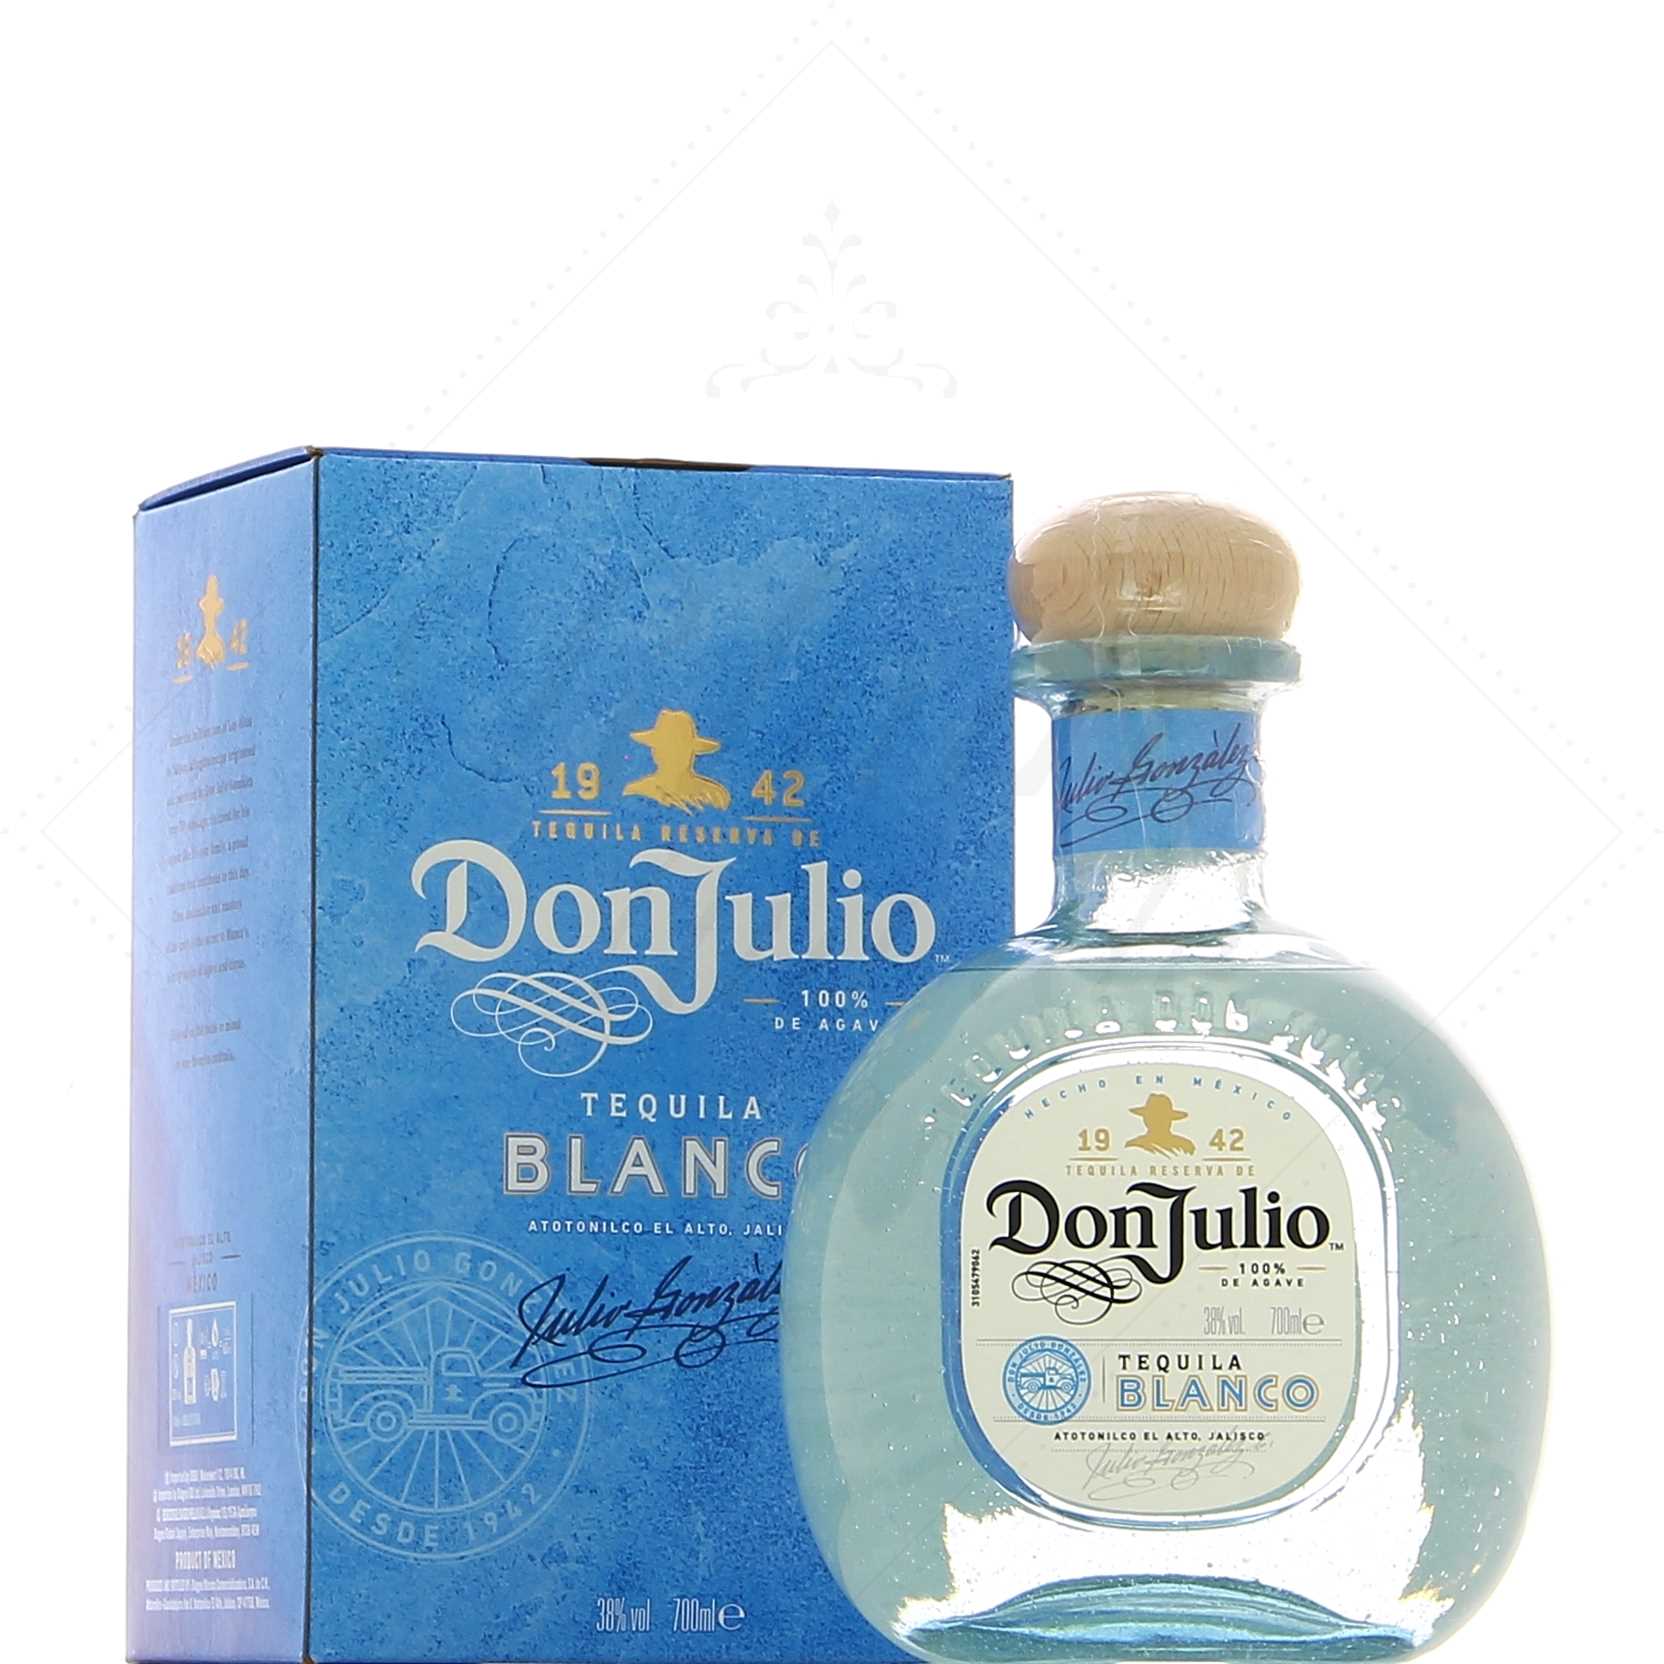 The 14 Best Blanco Tequilas to Drink